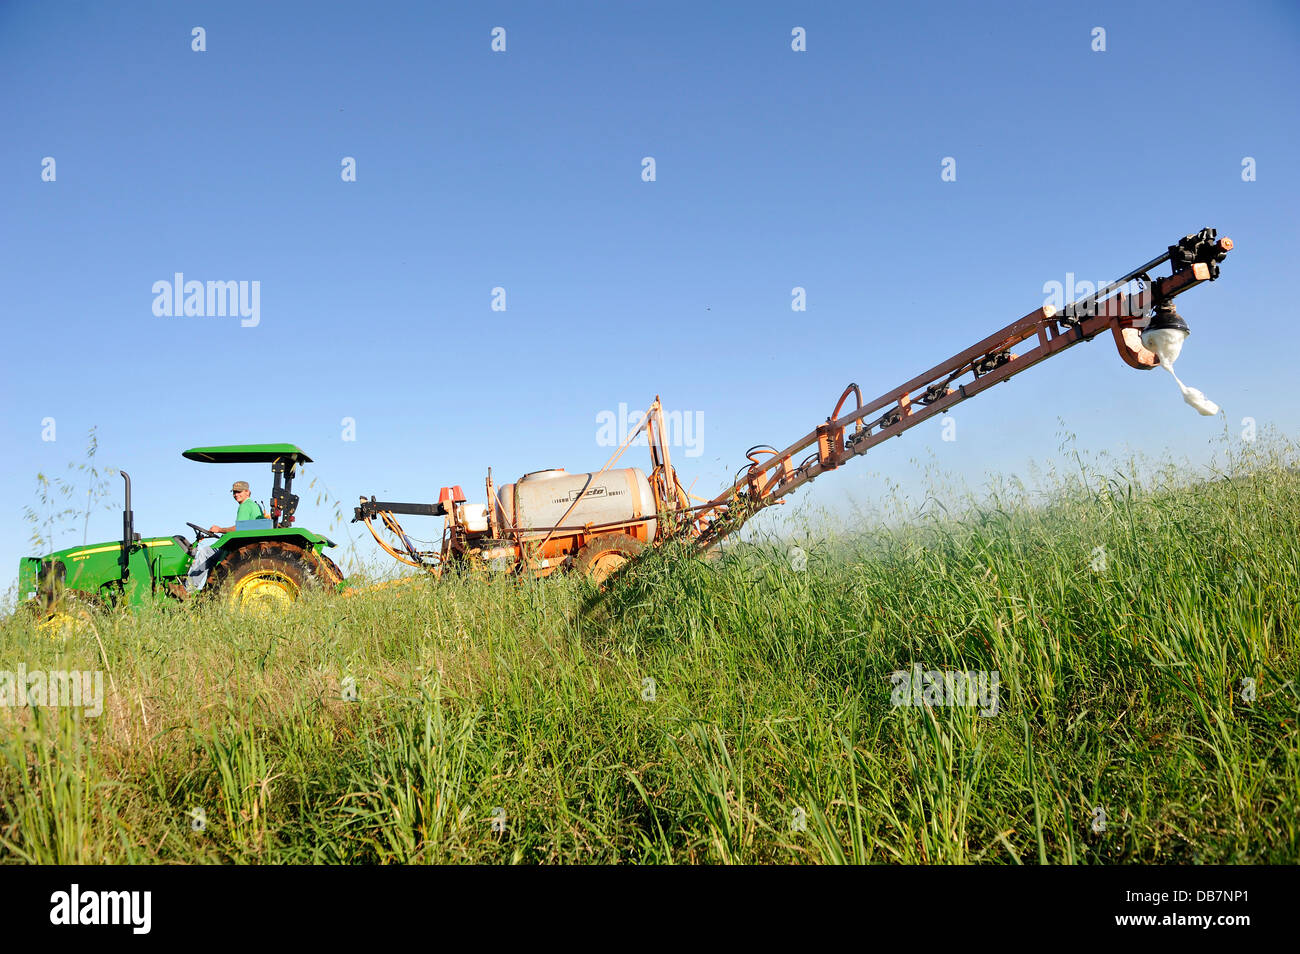 Spraying of pesticides on a field in a Mennonite community Stock Photo